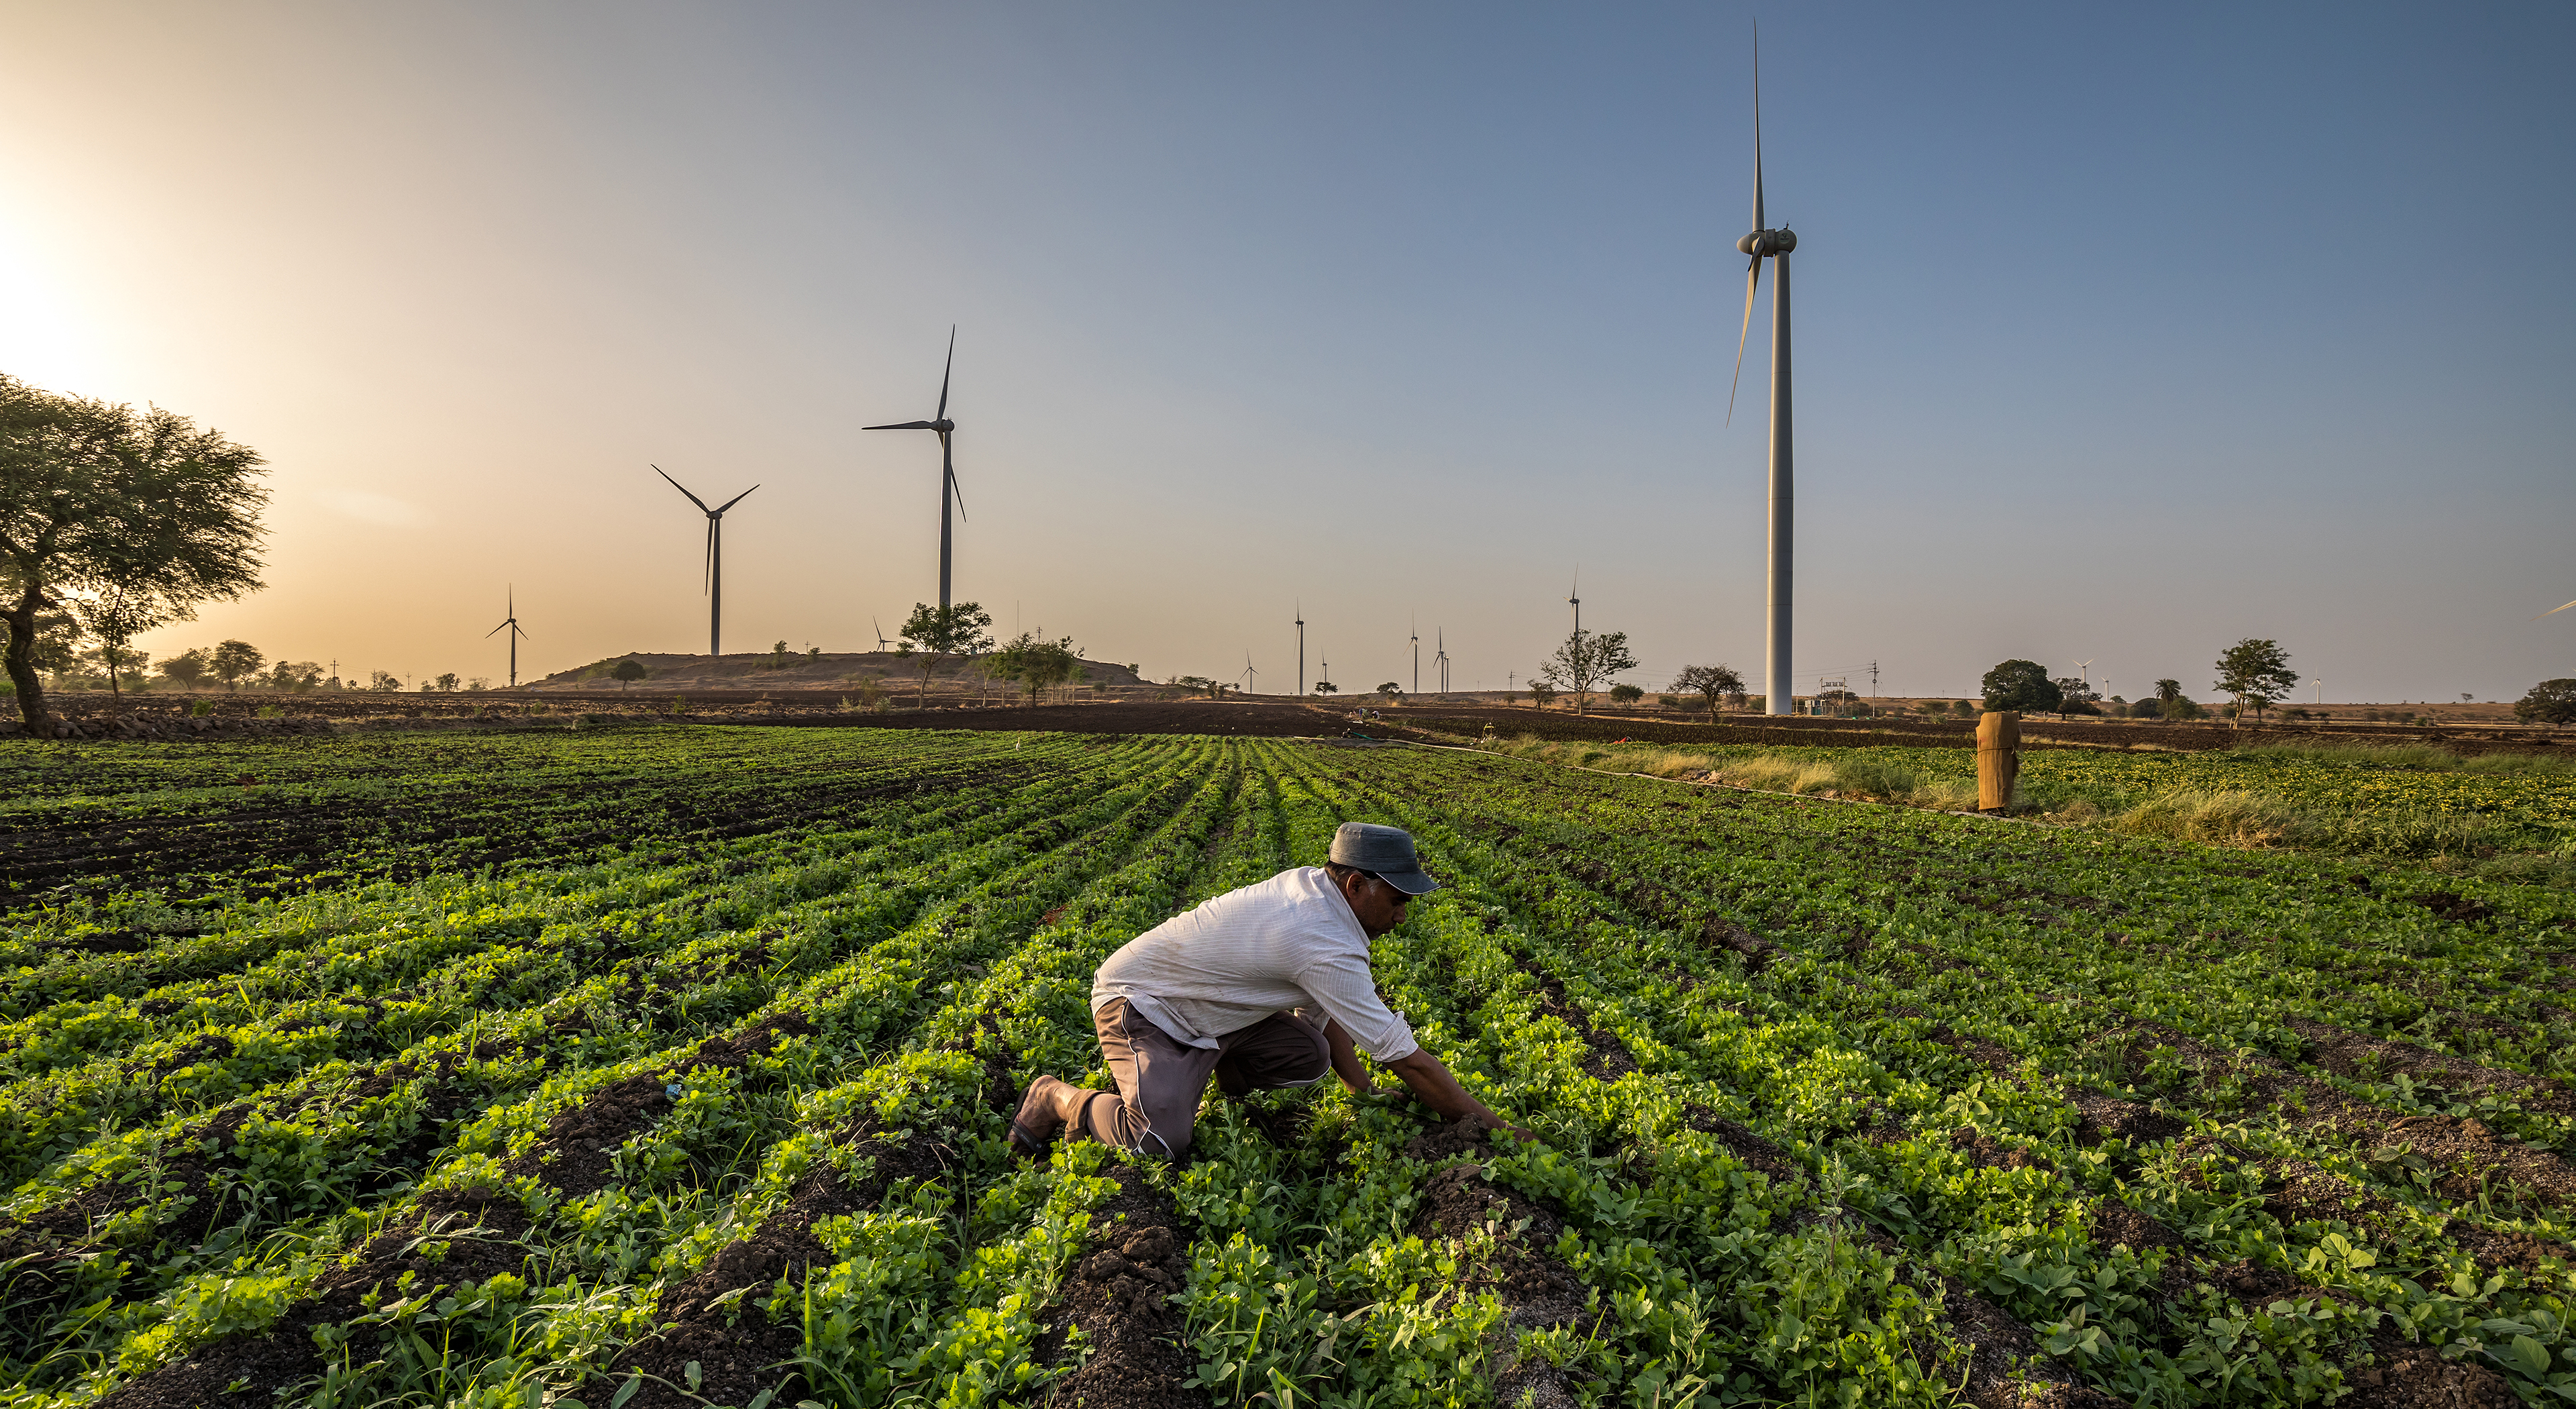 	 Wind Vision Photo Competition Winners Local Impact  “An Indian farmer working in his field next to a Wind turbine in Dhar. picture taken in Dhar district of Madhya Pradesh state of India.”